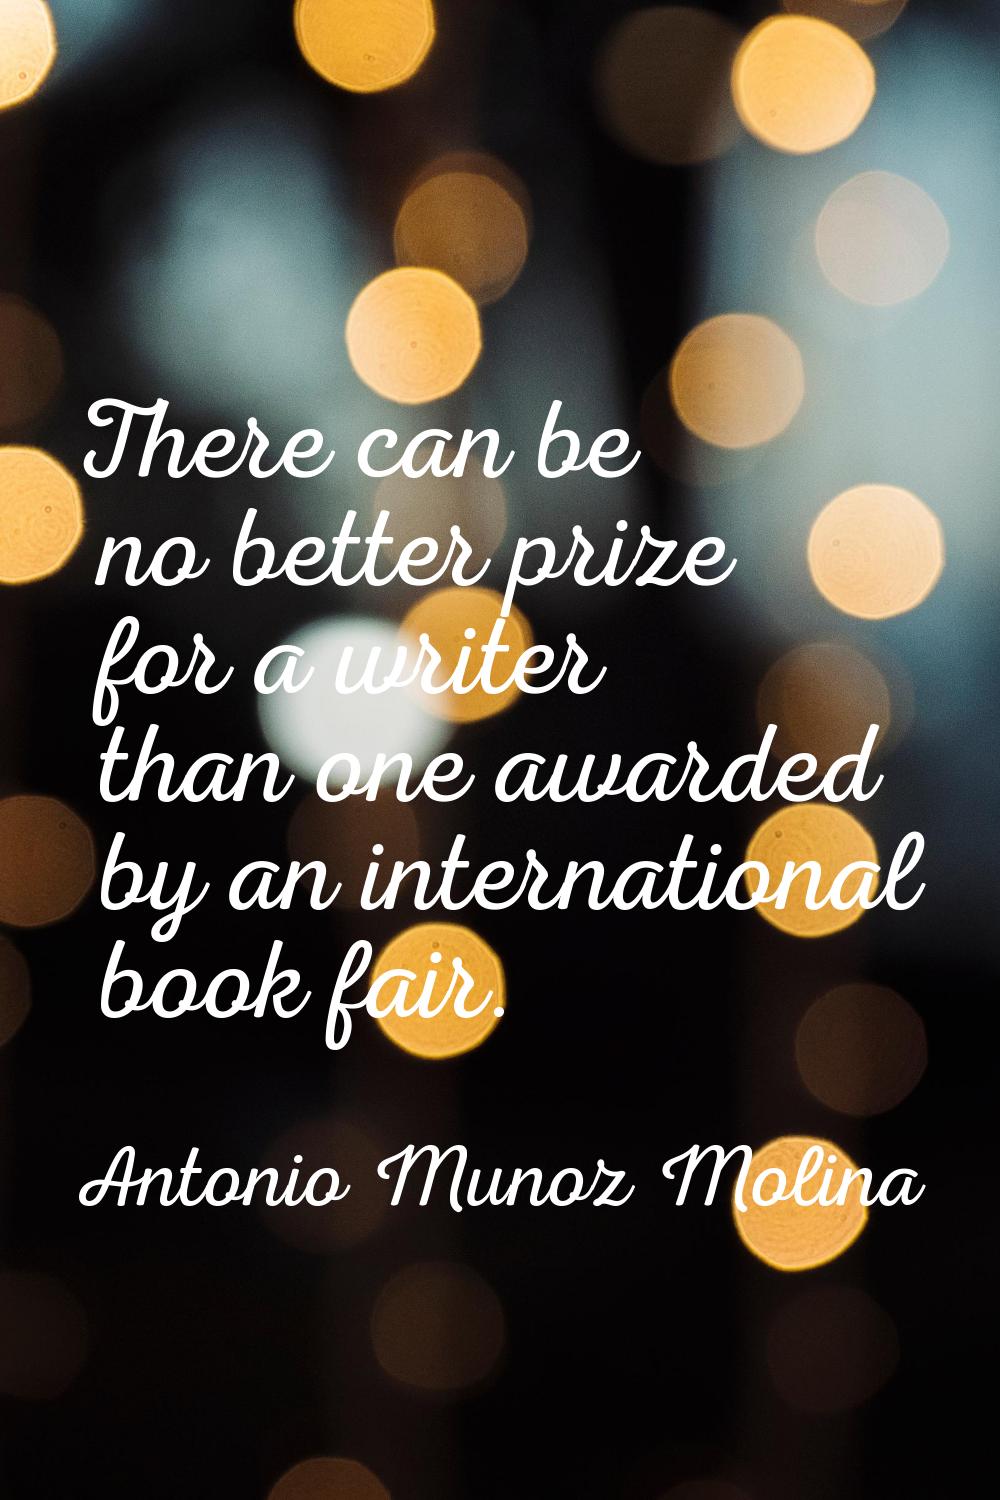 There can be no better prize for a writer than one awarded by an international book fair.